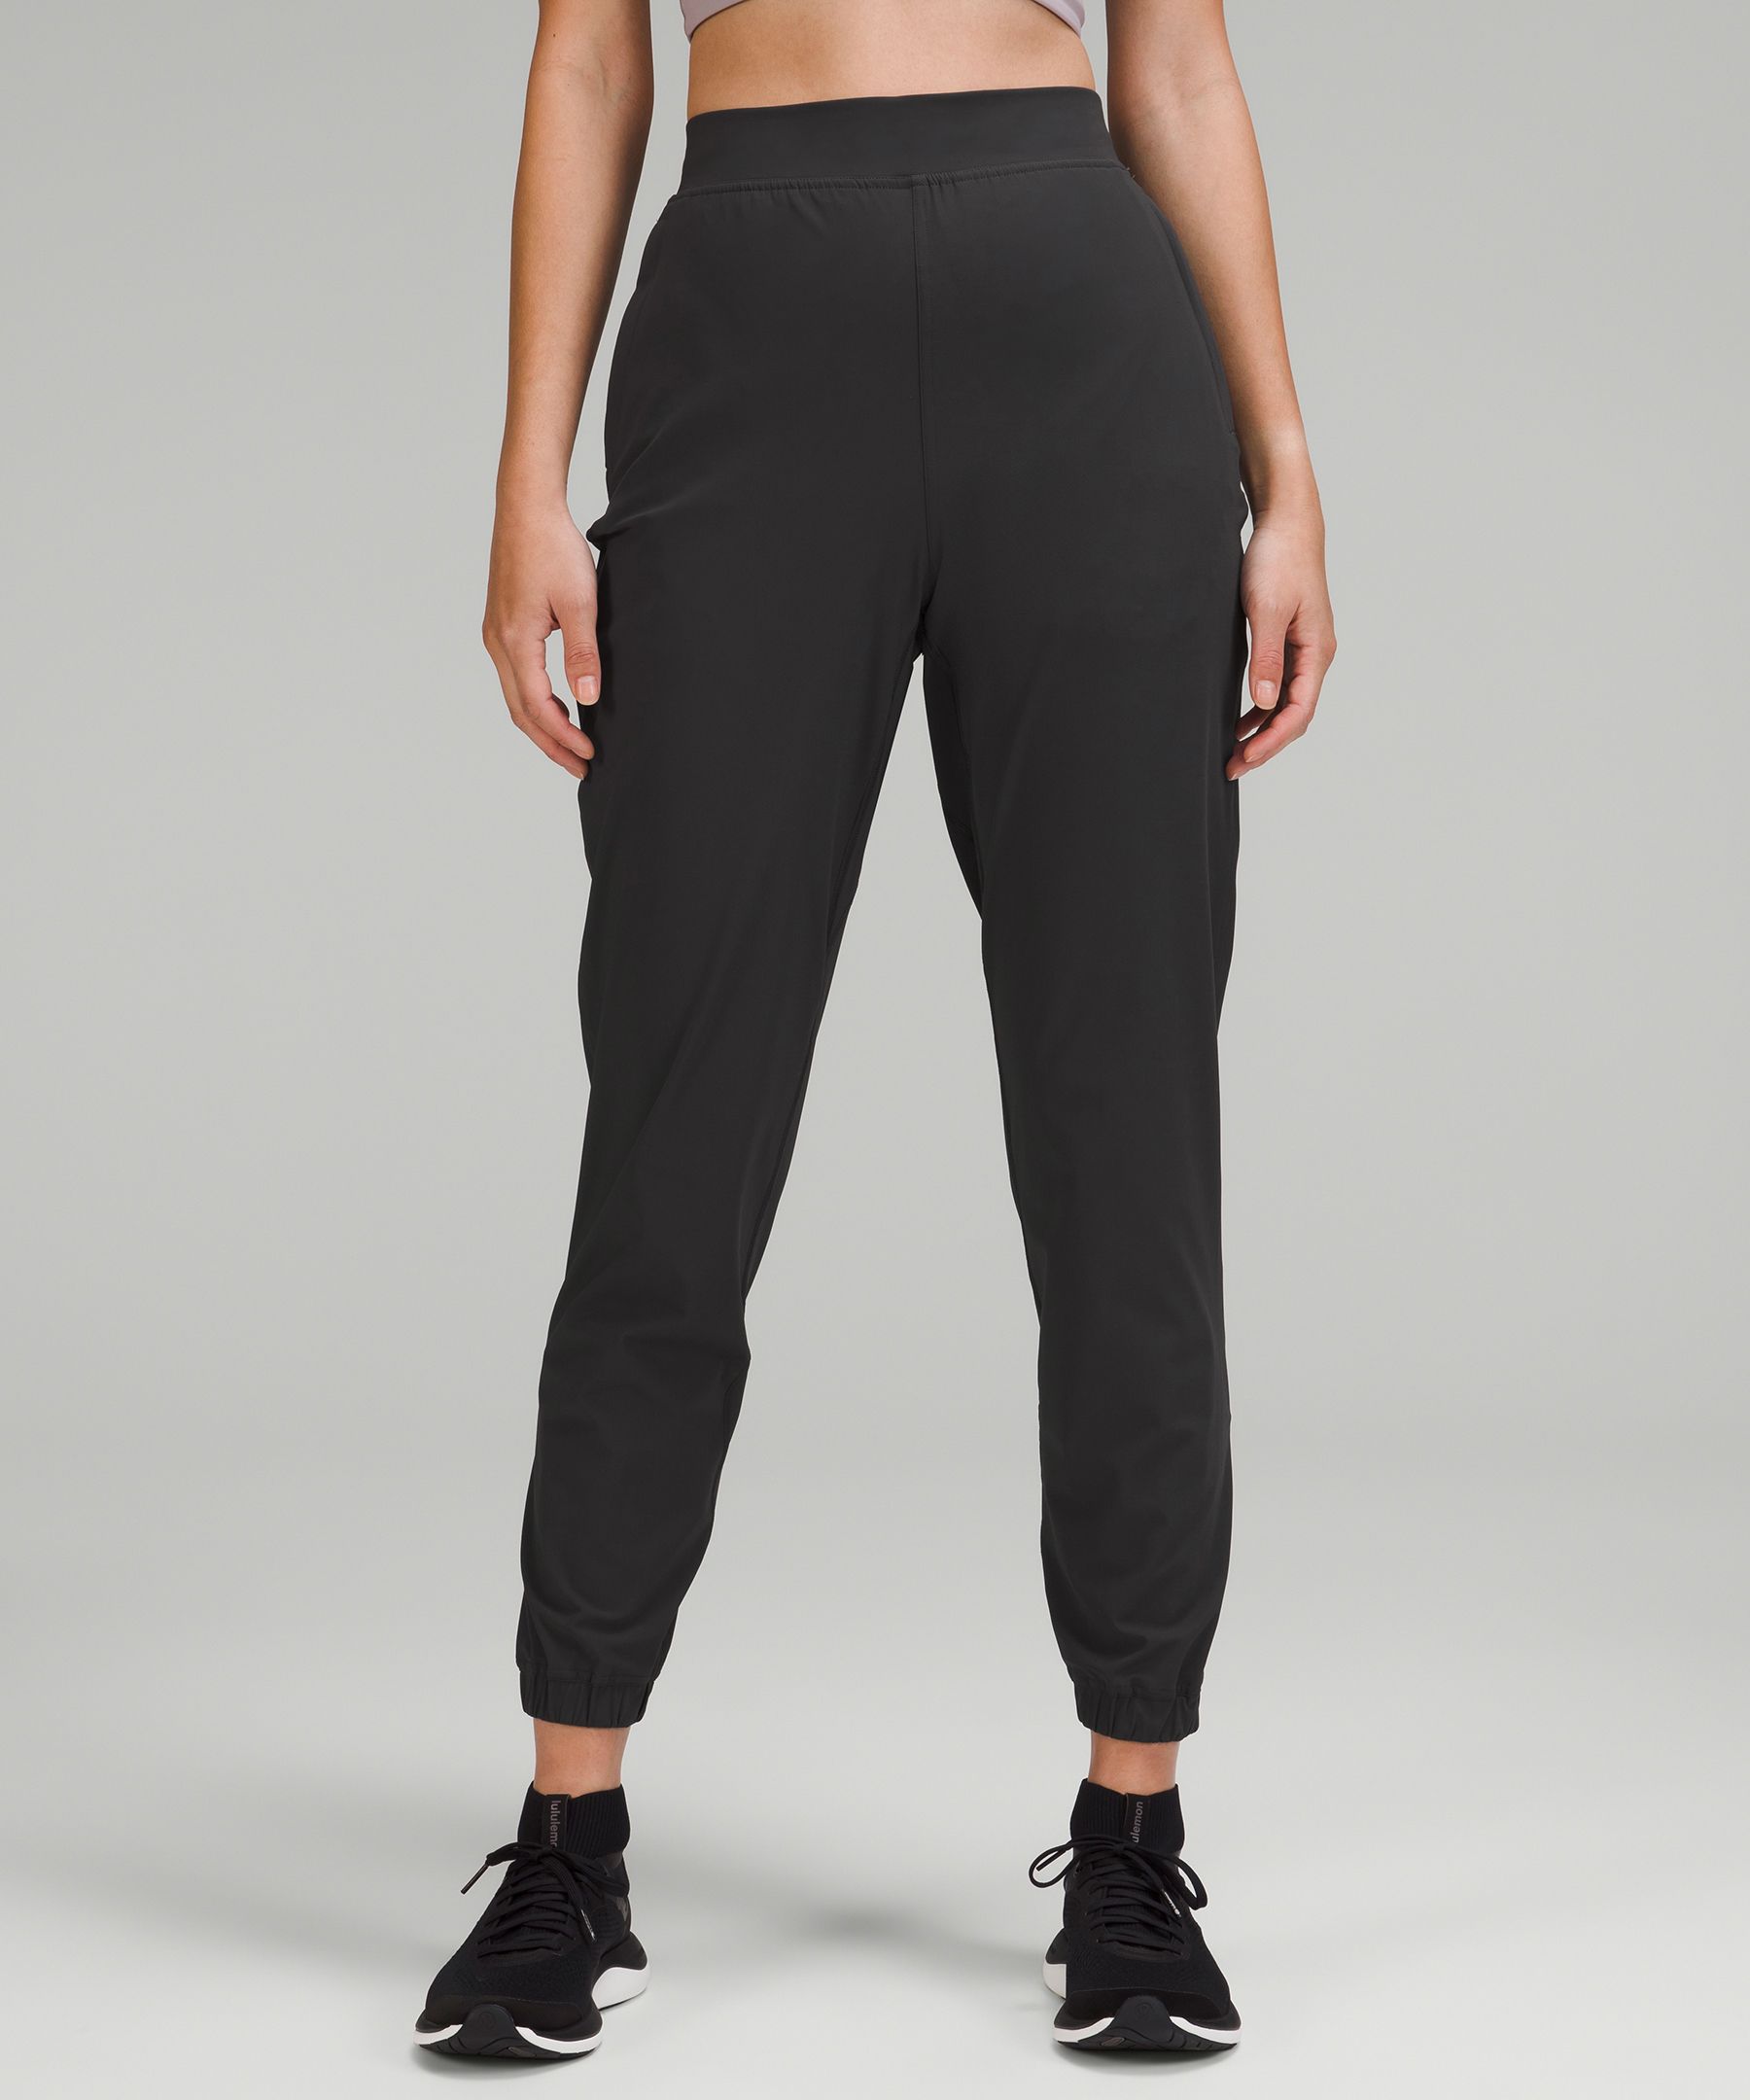 Adapted State High-Rise Jogger *Full Length, Women's Joggers